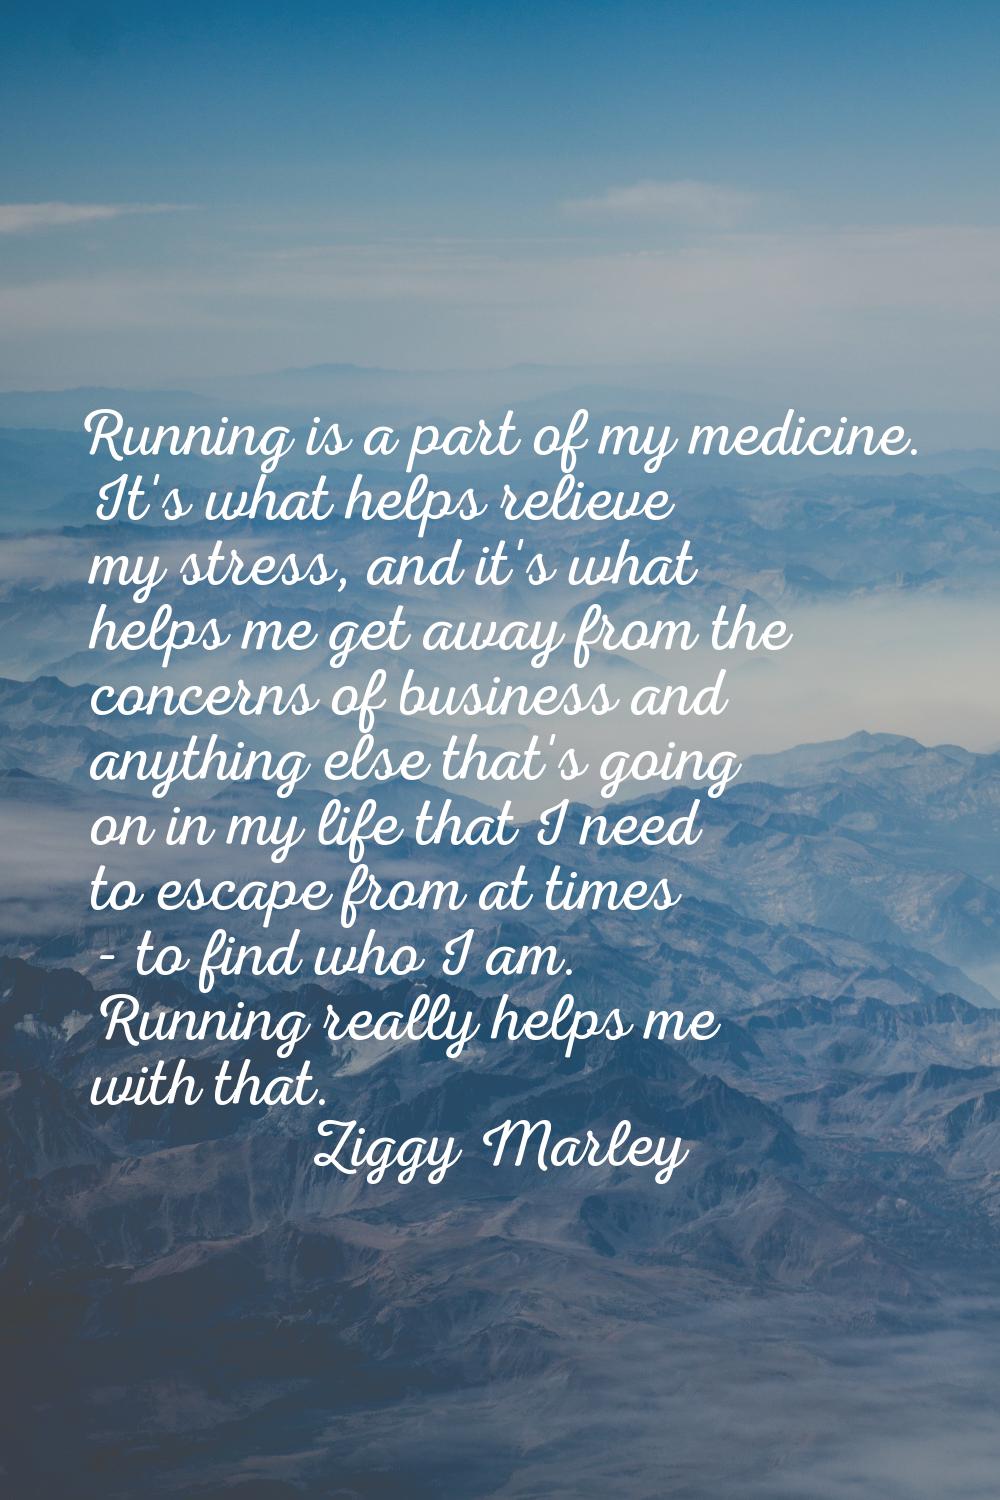 Running is a part of my medicine. It's what helps relieve my stress, and it's what helps me get awa